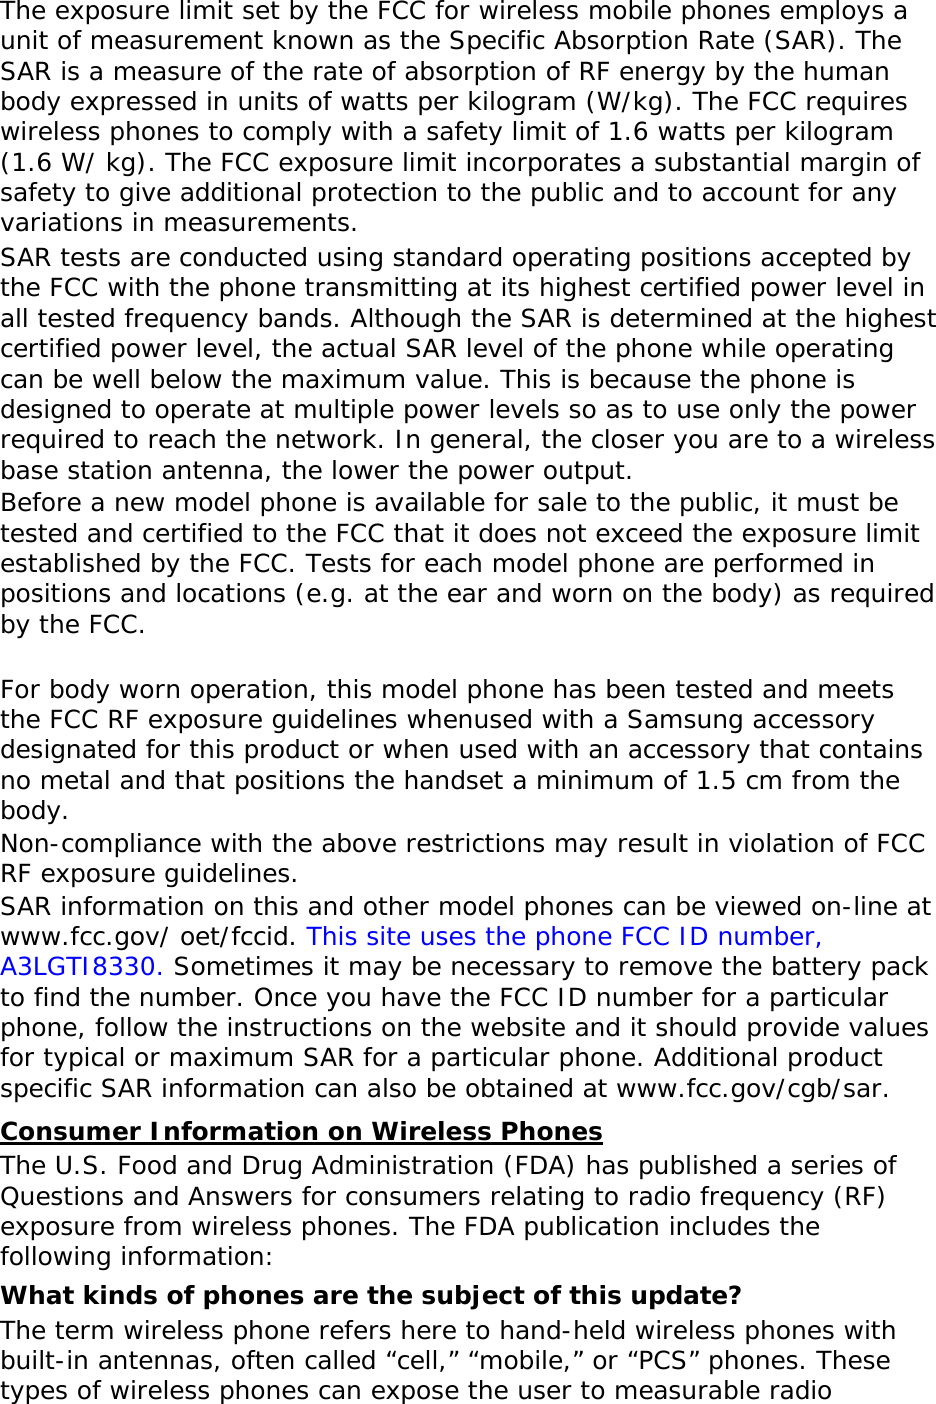 The exposure limit set by the FCC for wireless mobile phones employs a unit of measurement known as the Specific Absorption Rate (SAR). The SAR is a measure of the rate of absorption of RF energy by the human body expressed in units of watts per kilogram (W/kg). The FCC requires wireless phones to comply with a safety limit of 1.6 watts per kilogram (1.6 W/ kg). The FCC exposure limit incorporates a substantial margin of safety to give additional protection to the public and to account for any variations in measurements. SAR tests are conducted using standard operating positions accepted by the FCC with the phone transmitting at its highest certified power level in all tested frequency bands. Although the SAR is determined at the highest certified power level, the actual SAR level of the phone while operating can be well below the maximum value. This is because the phone is designed to operate at multiple power levels so as to use only the power required to reach the network. In general, the closer you are to a wireless base station antenna, the lower the power output. Before a new model phone is available for sale to the public, it must be tested and certified to the FCC that it does not exceed the exposure limit established by the FCC. Tests for each model phone are performed in positions and locations (e.g. at the ear and worn on the body) as required by the FCC.    For body worn operation, this model phone has been tested and meets the FCC RF exposure guidelines whenused with a Samsung accessory designated for this product or when used with an accessory that contains no metal and that positions the handset a minimum of 1.5 cm from the body.  Non-compliance with the above restrictions may result in violation of FCC RF exposure guidelines. SAR information on this and other model phones can be viewed on-line at www.fcc.gov/ oet/fccid. This site uses the phone FCC ID number, A3LGTI8330. Sometimes it may be necessary to remove the battery pack to find the number. Once you have the FCC ID number for a particular phone, follow the instructions on the website and it should provide values for typical or maximum SAR for a particular phone. Additional product specific SAR information can also be obtained at www.fcc.gov/cgb/sar. Consumer Information on Wireless Phones The U.S. Food and Drug Administration (FDA) has published a series of Questions and Answers for consumers relating to radio frequency (RF) exposure from wireless phones. The FDA publication includes the following information: What kinds of phones are the subject of this update? The term wireless phone refers here to hand-held wireless phones with built-in antennas, often called “cell,” “mobile,” or “PCS” phones. These types of wireless phones can expose the user to measurable radio 